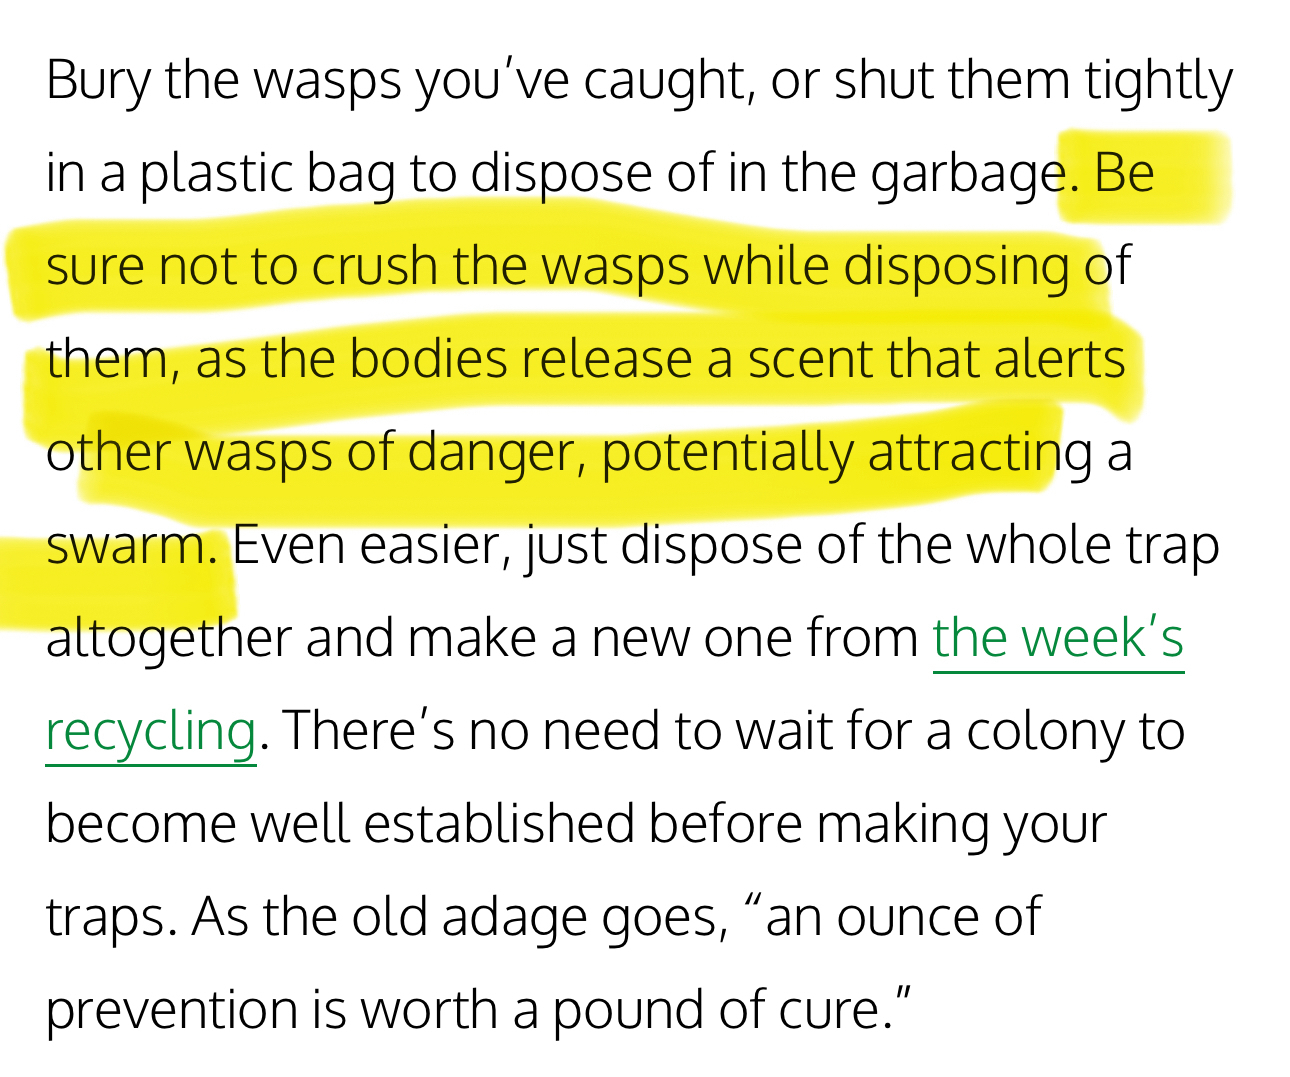 Text excerpt with highlighted portions discussing the disposal of caught wasps, cautioning not to crush them to avoid releasing a scent that could attract more wasps, and suggesting the disposal of the whole trap made from recycled materials.